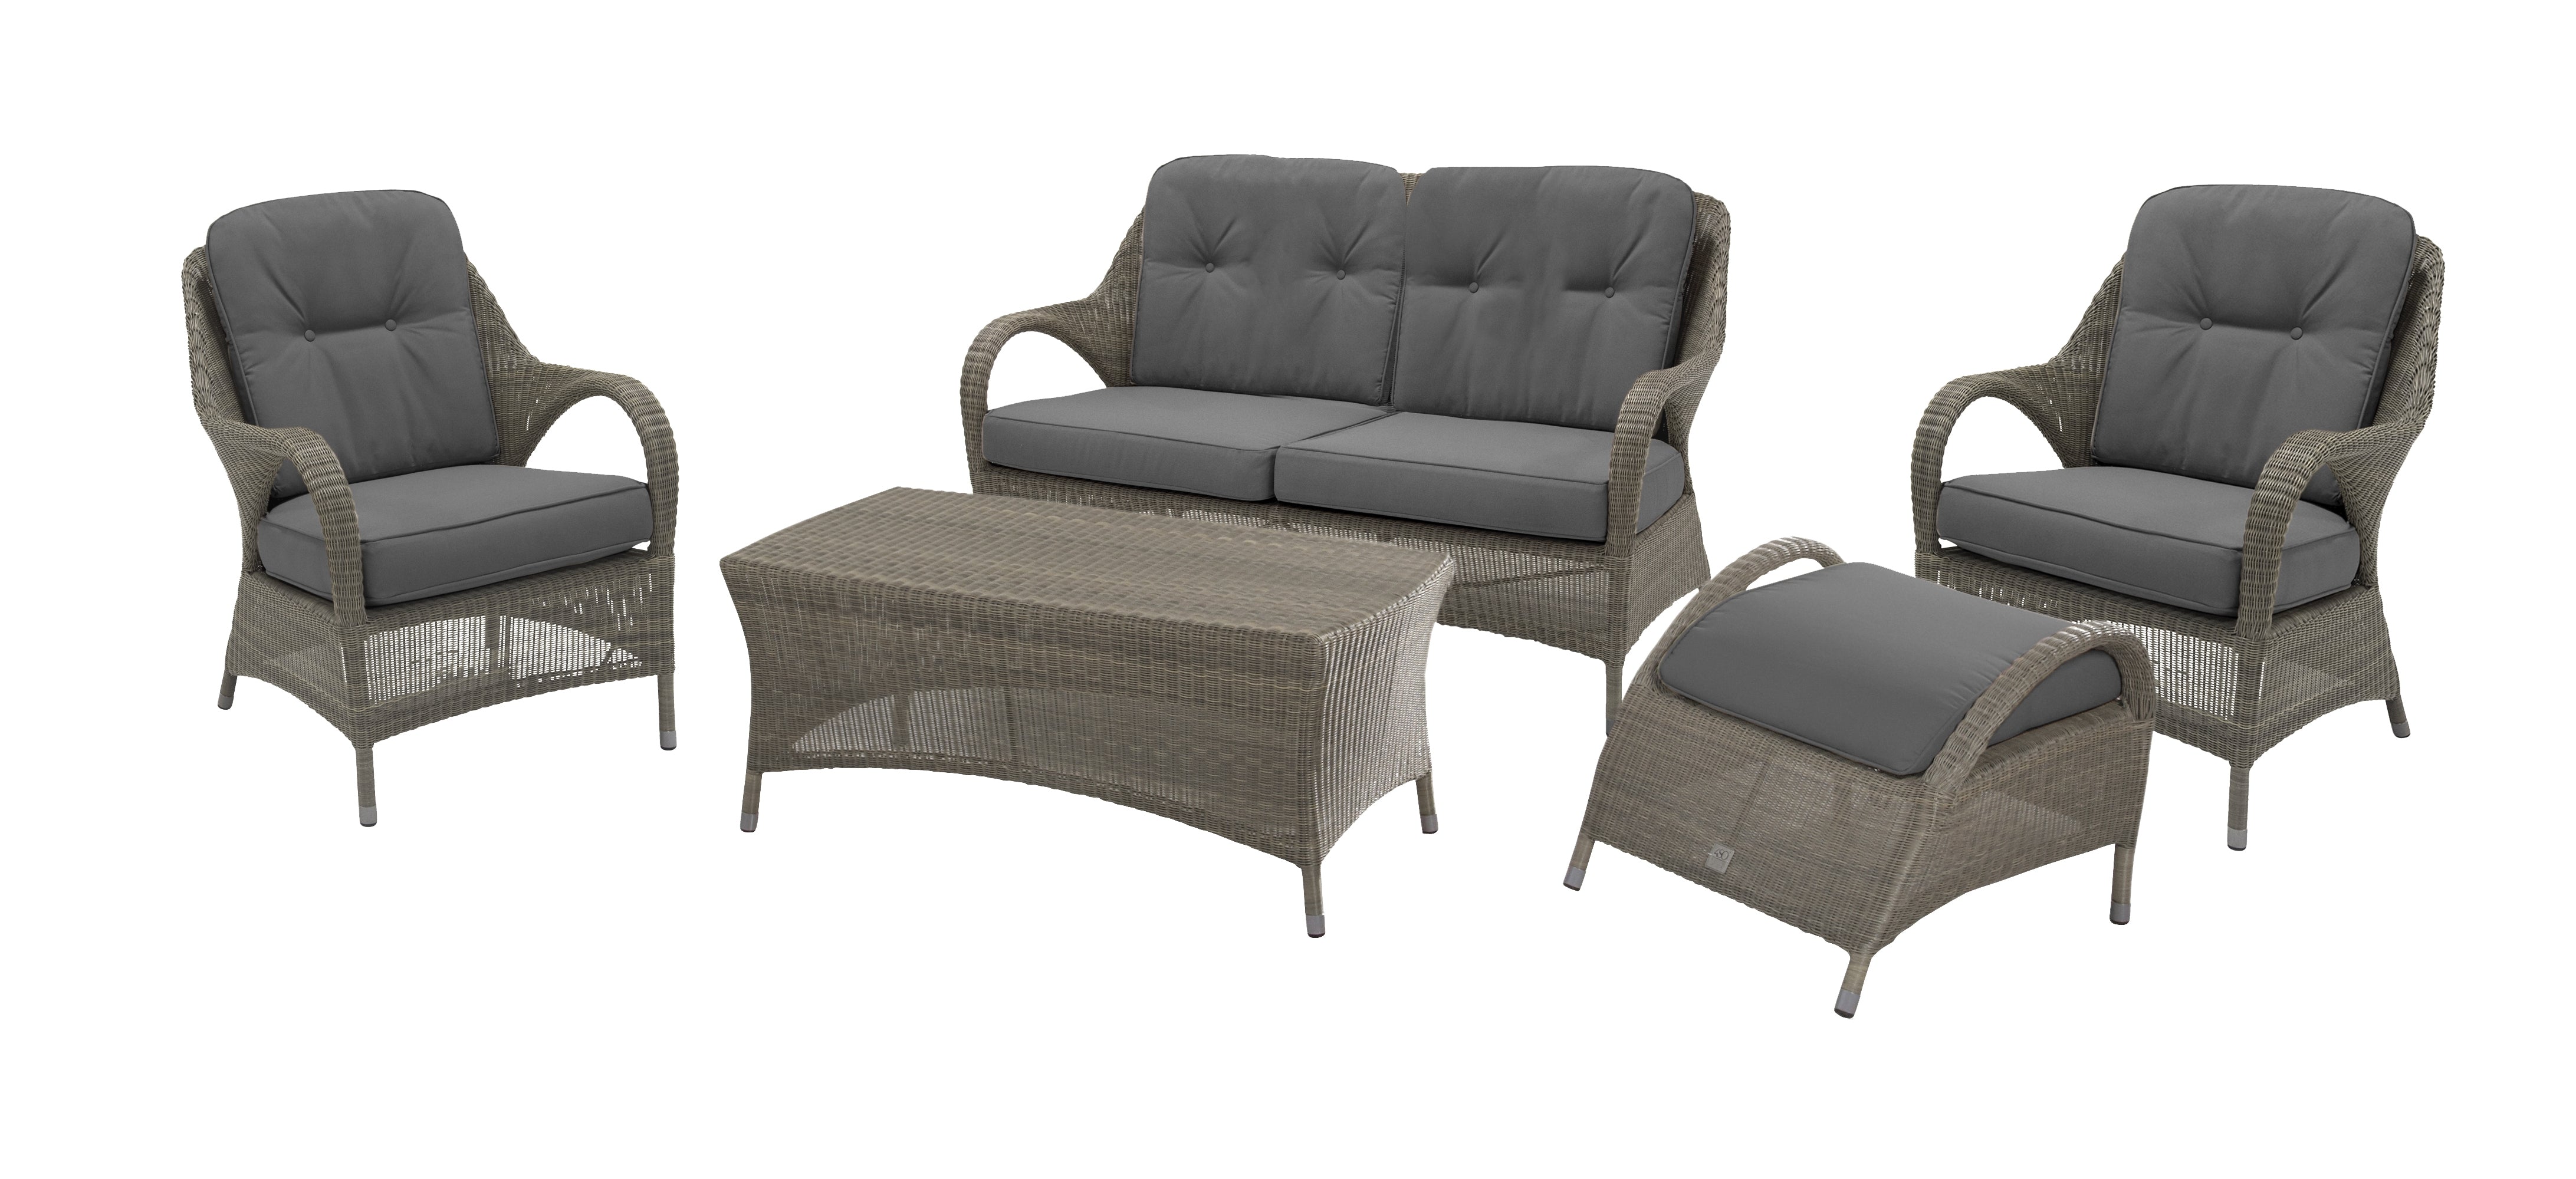 Sussex Outdoor Lounge Set by 4 Seasons Outdoor